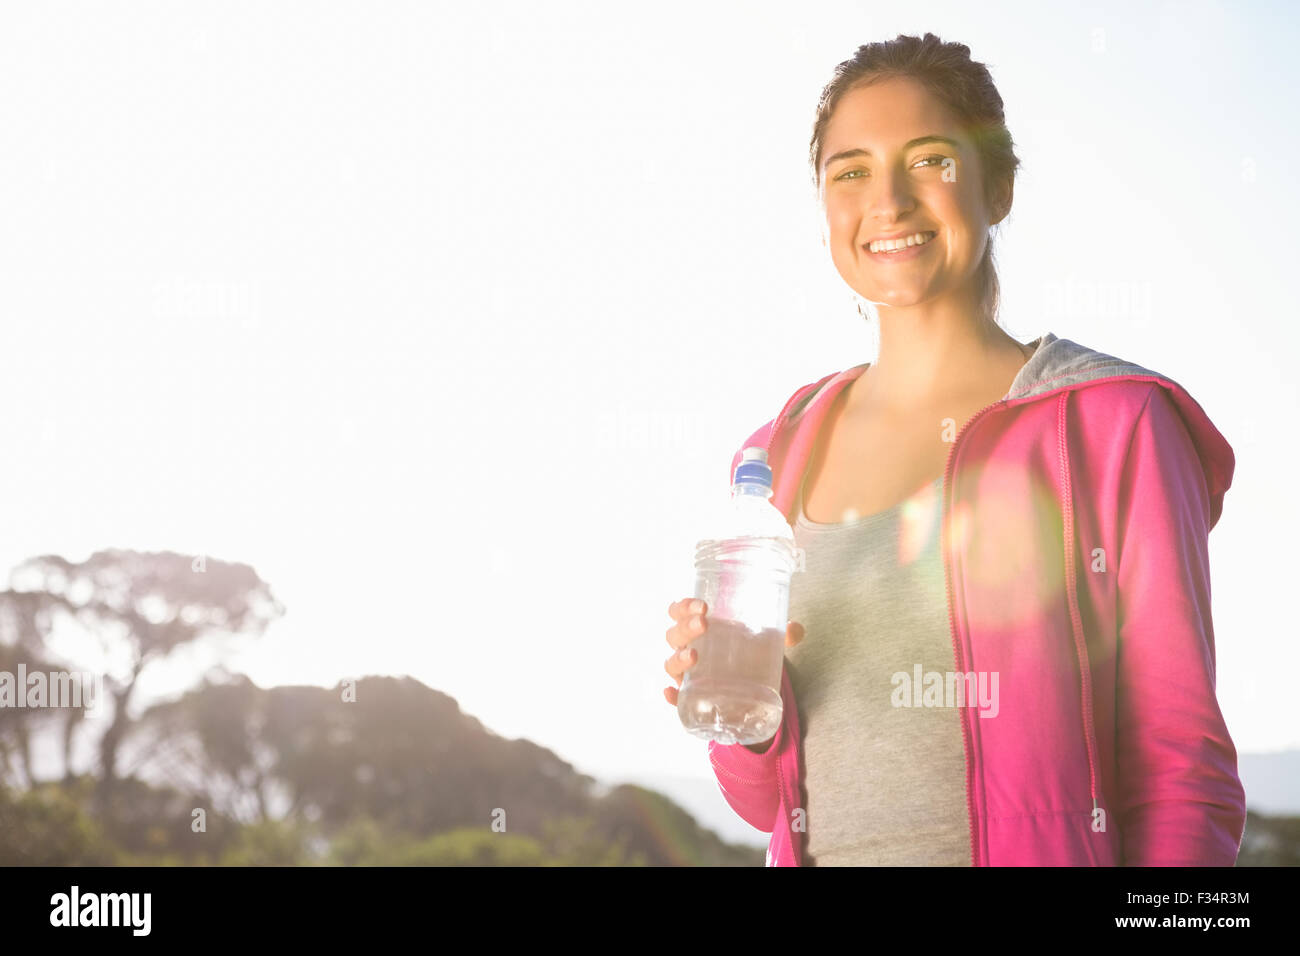 Fit woman drinking water from bottle Stock Photo